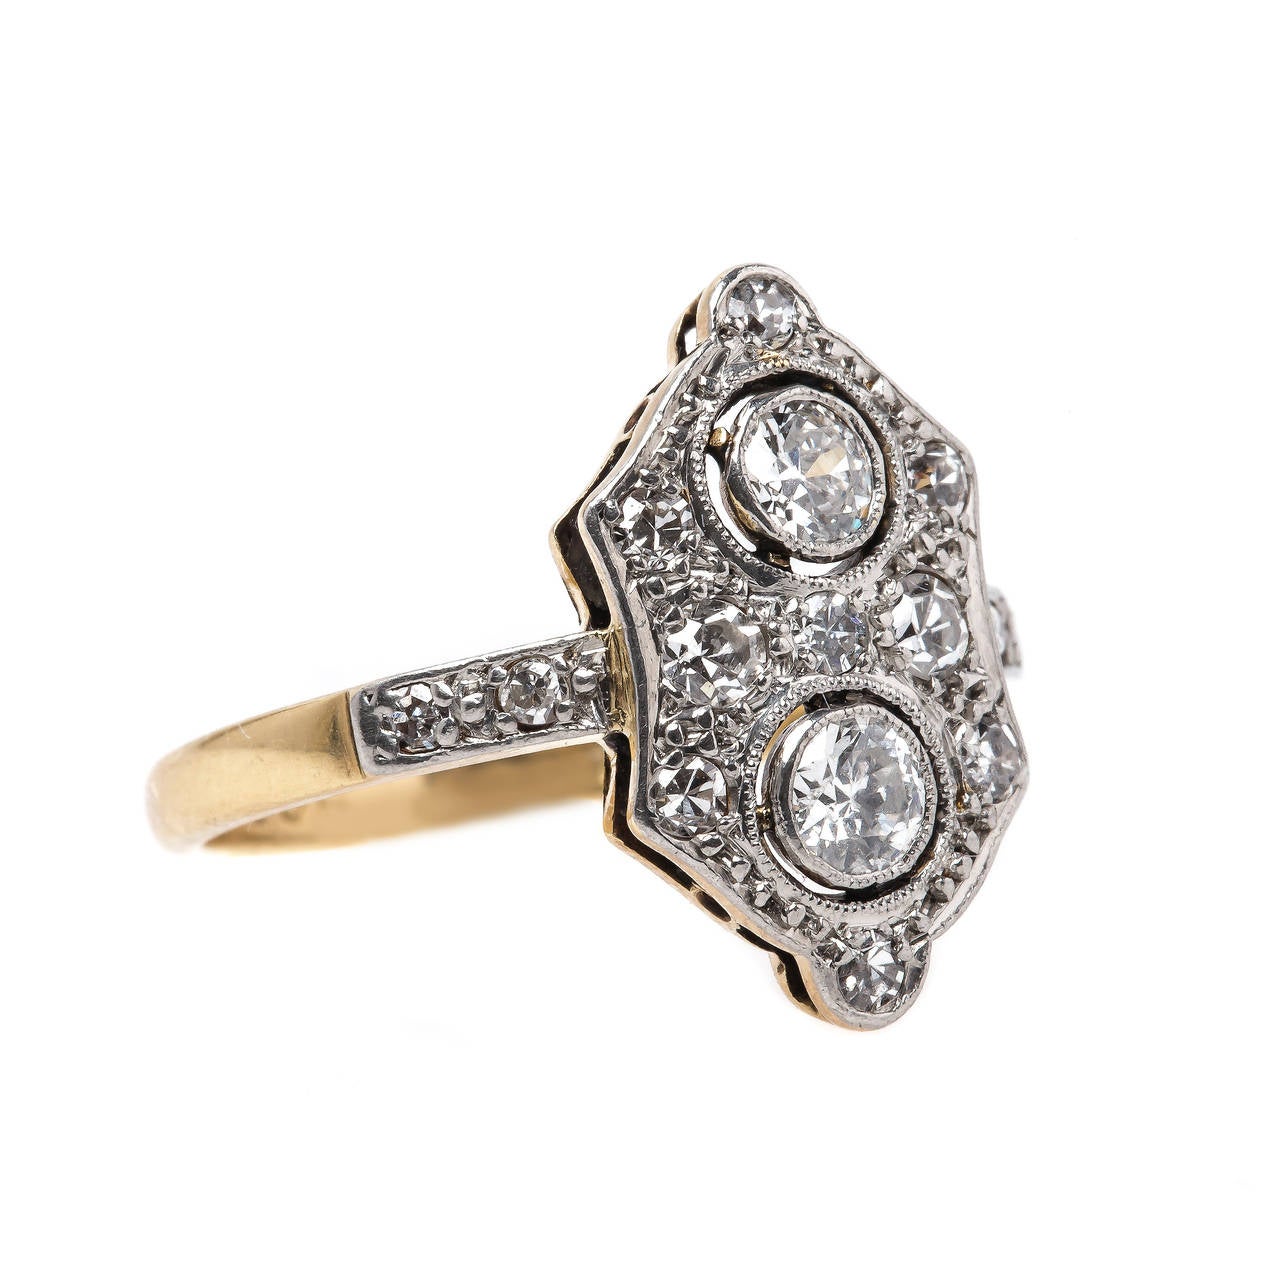 Burnt Oak is an exceptional authentic Edwardian era (circa 1905) navette style platinum topped 18k yellow gold diamond ring featuring two Old European Cut diamonds designed vertically in bezel settings, gauged at approximately 0.40ct total weight,